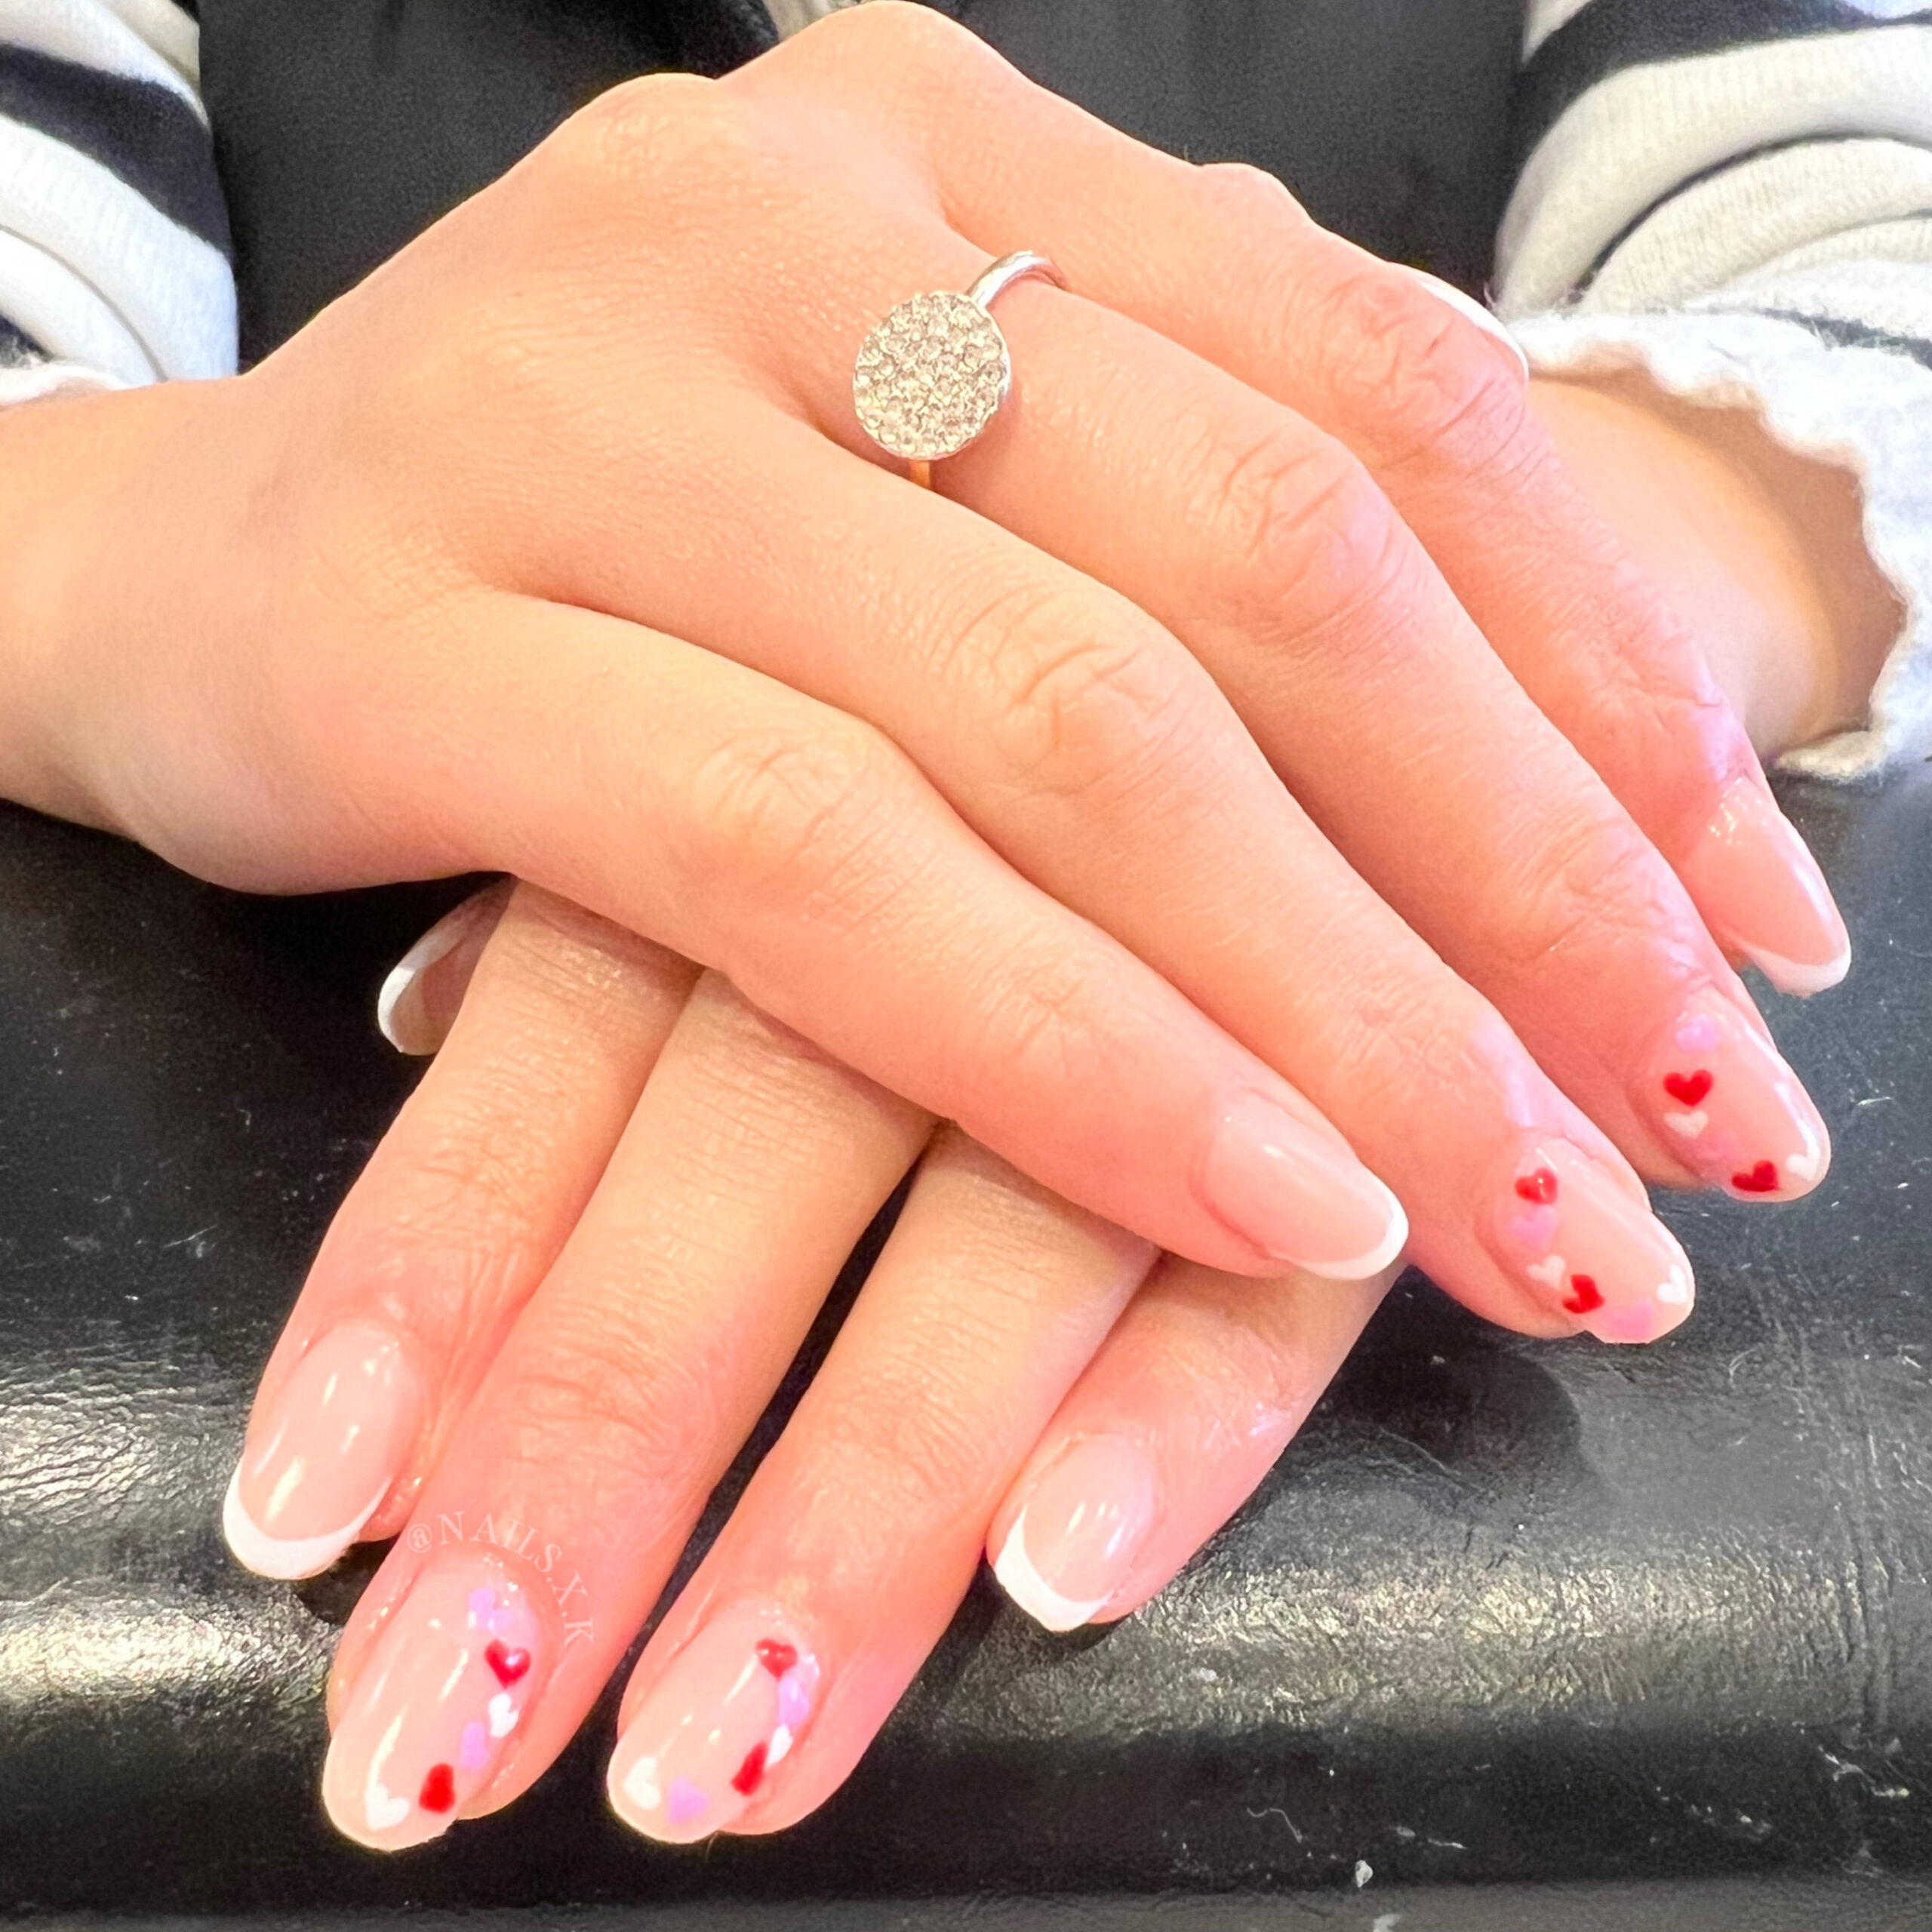 Hard gel nails with hand painted french tips and heart accent designs. Nails by K